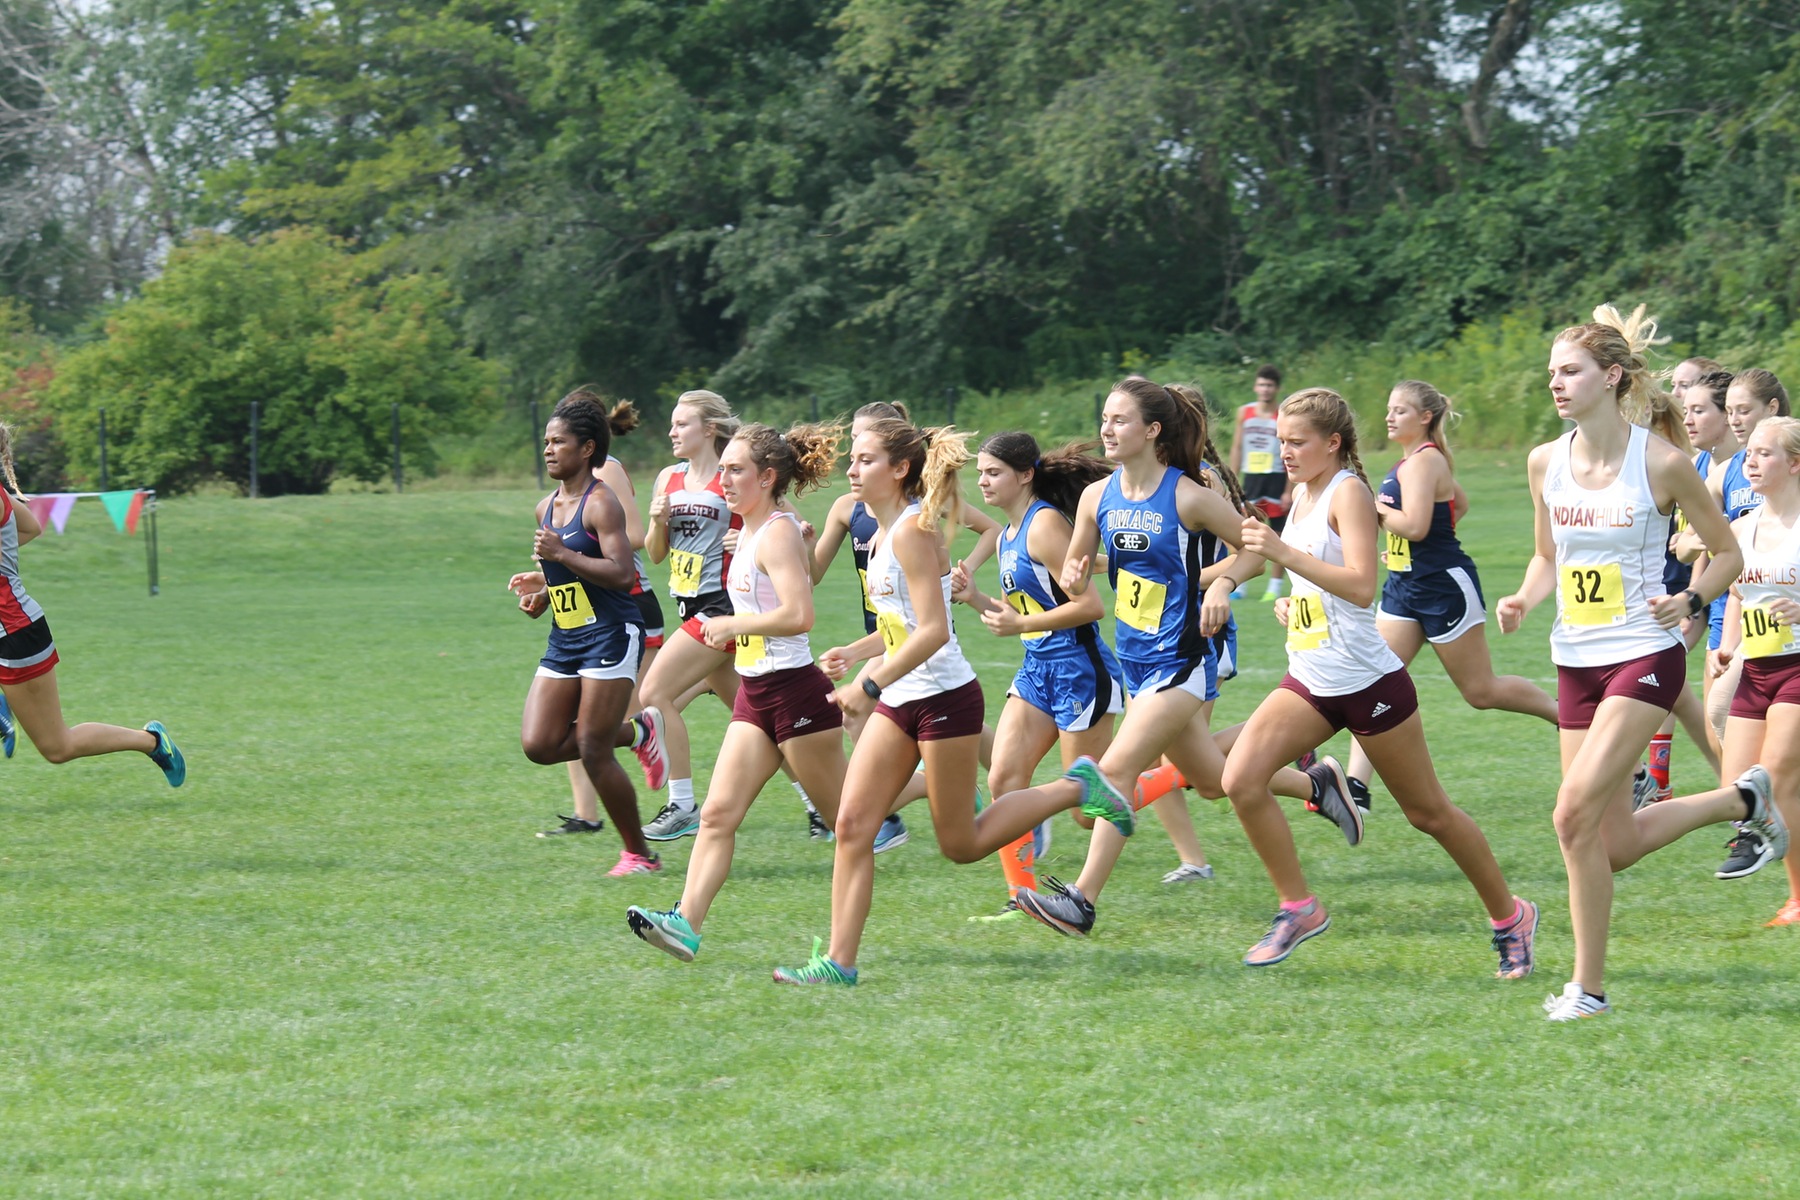 Women's cross country team competes at Brissman-Lundeen Invitational